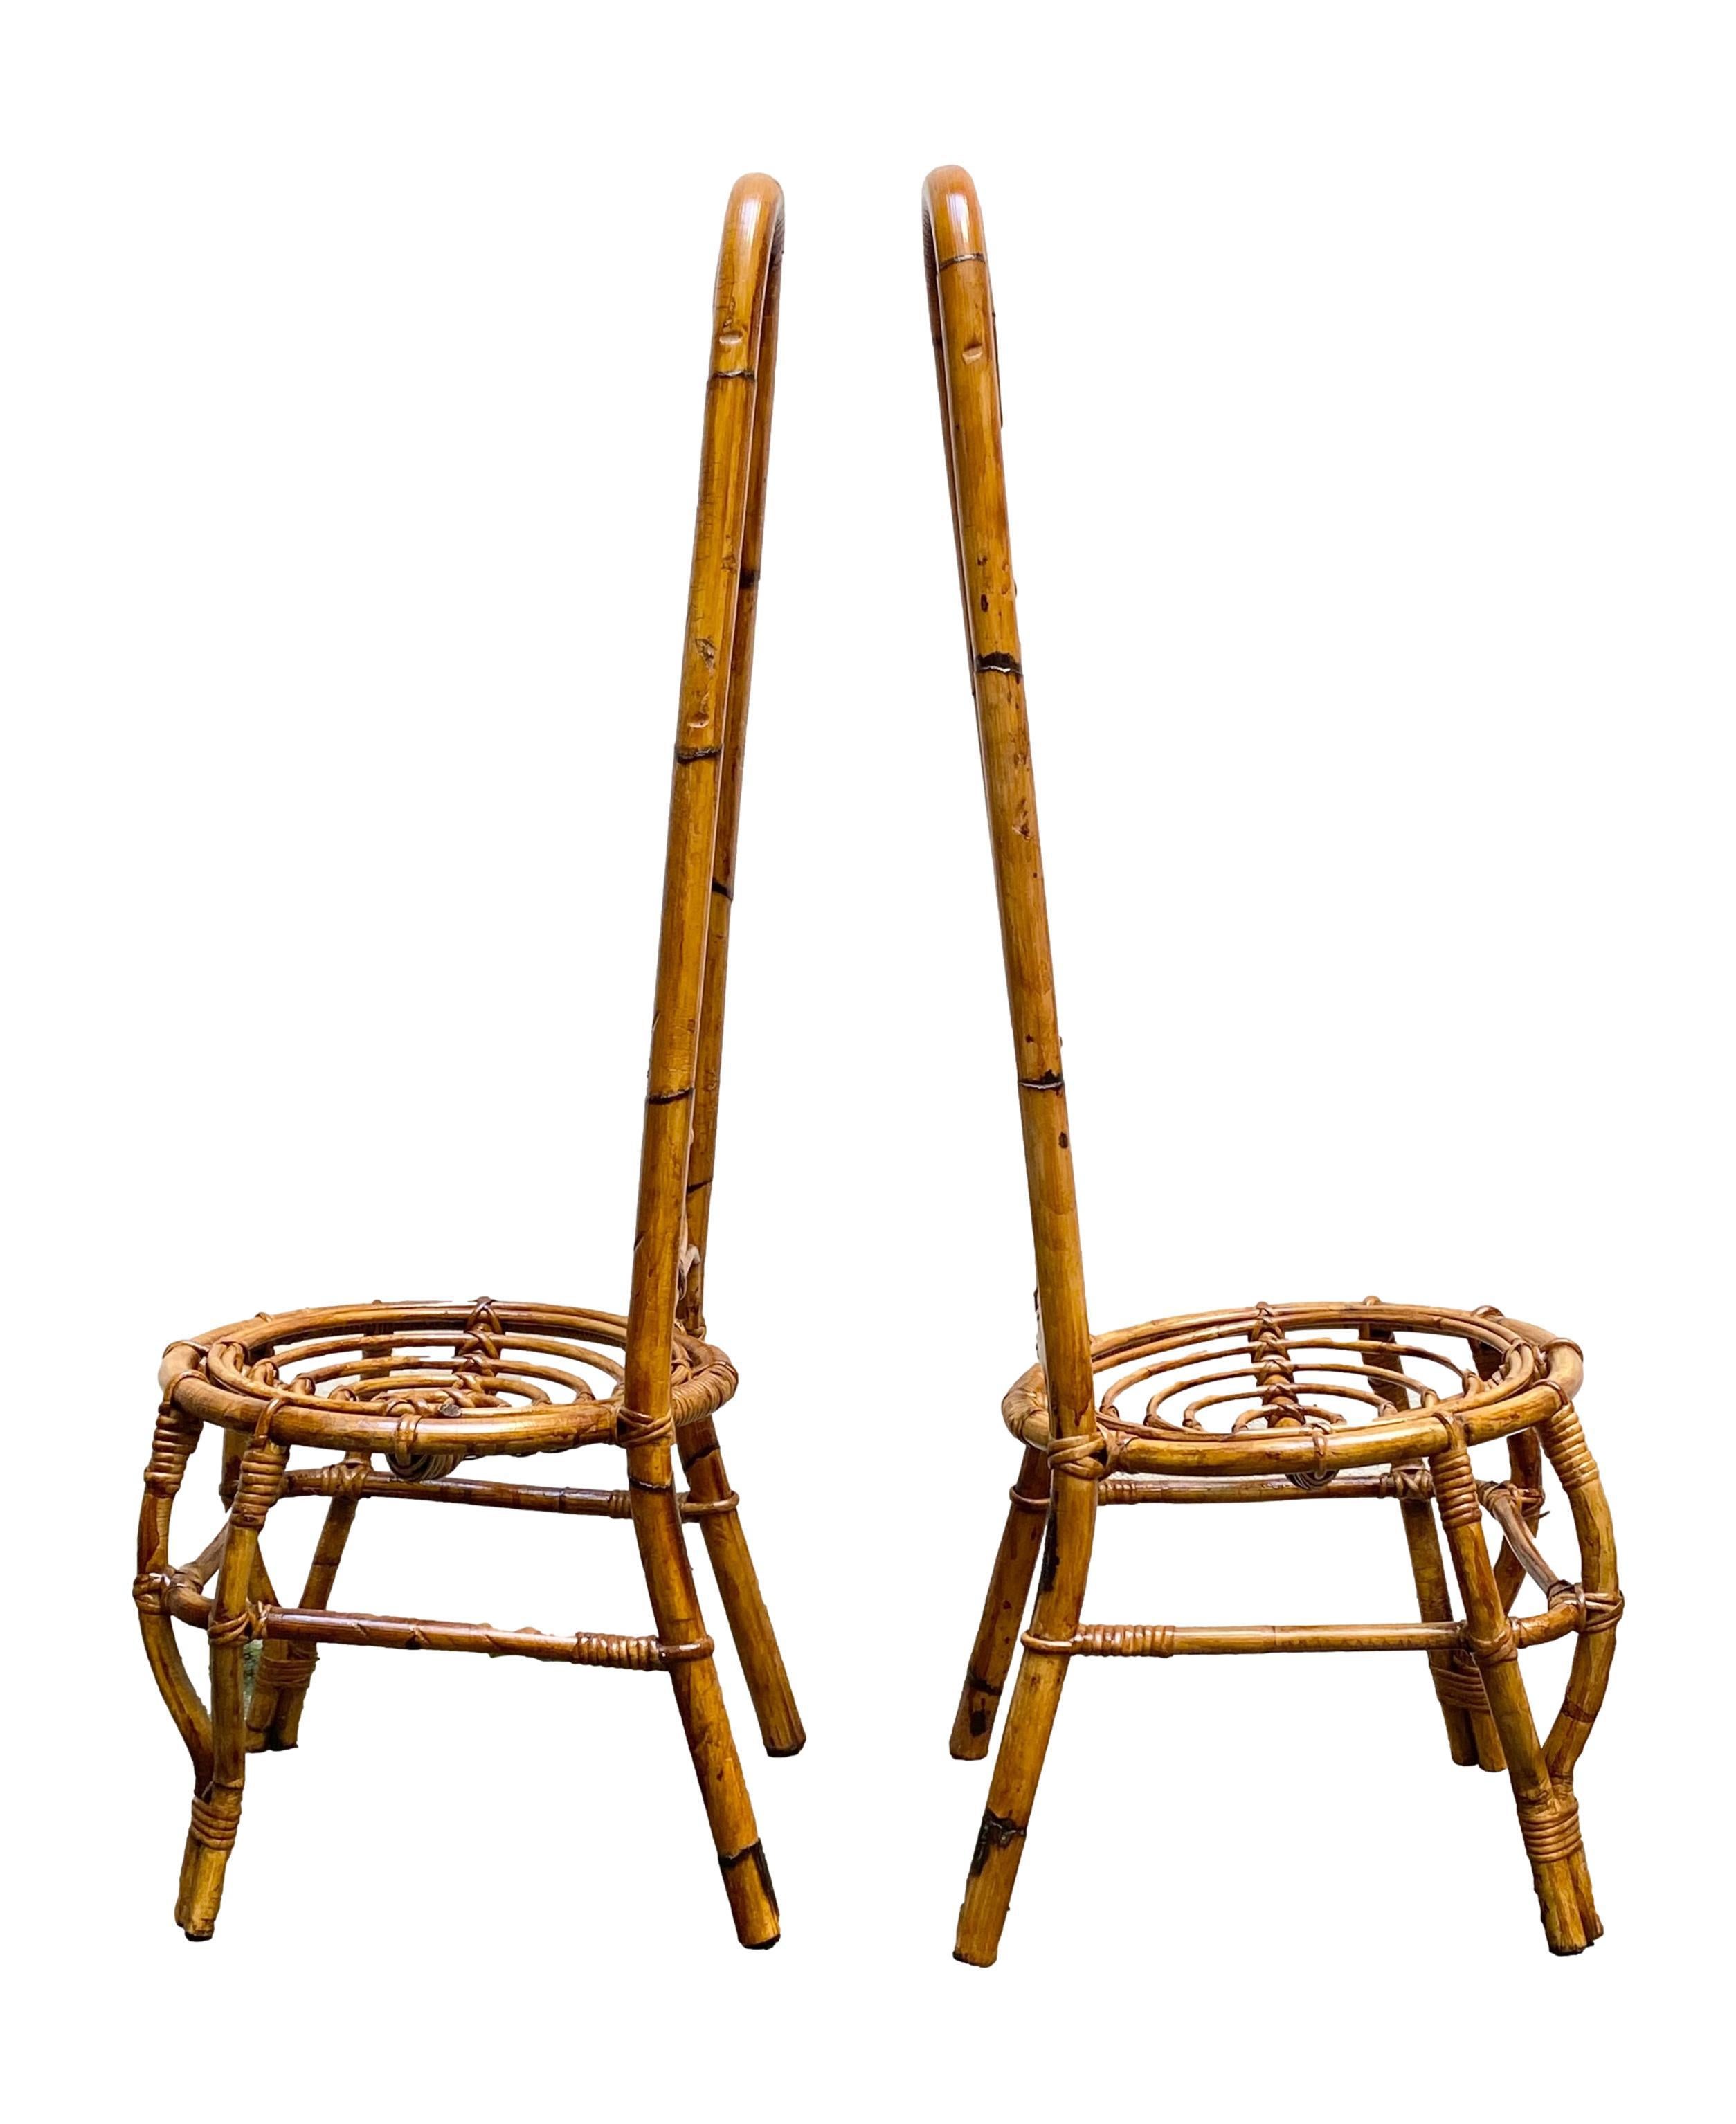 Pair of French Riviera bamboo and rattan dining or occasional chairs.
Excellent original condition.